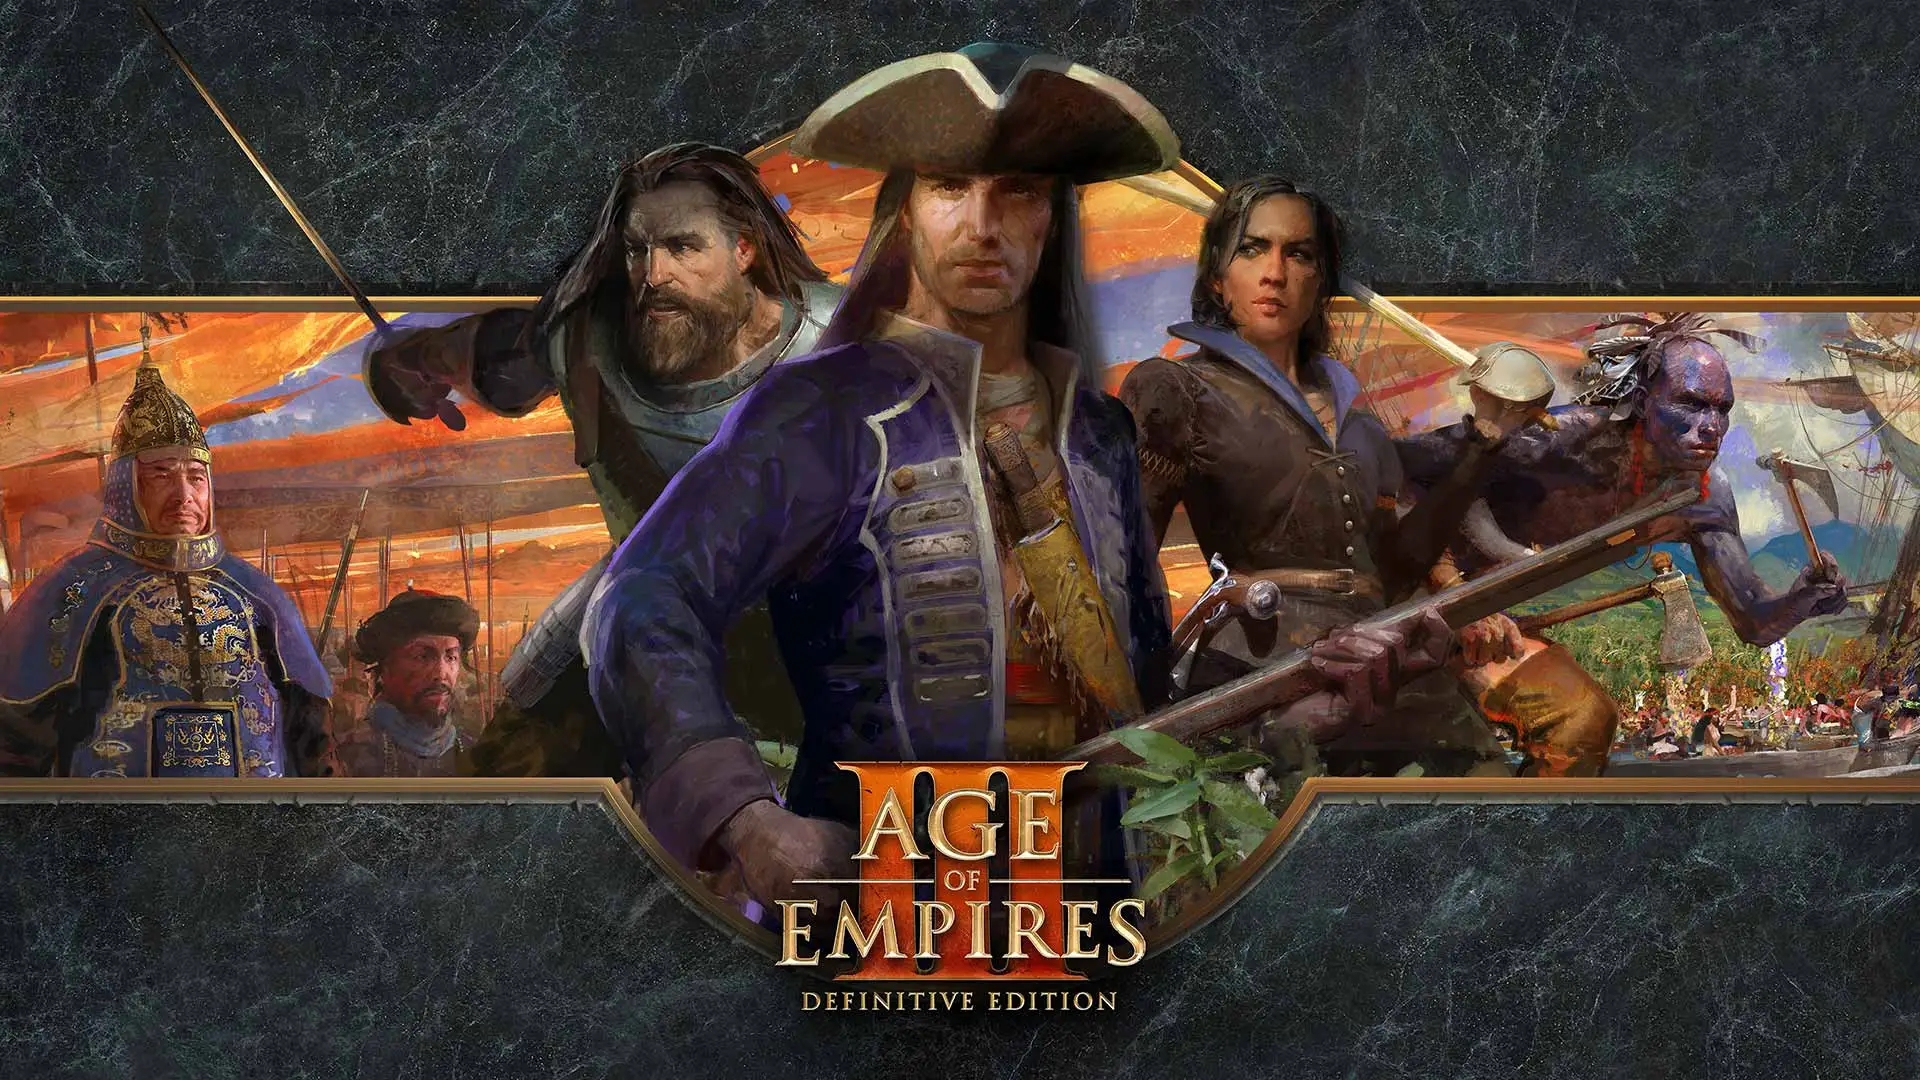 Age of empires 3 in steam фото 27